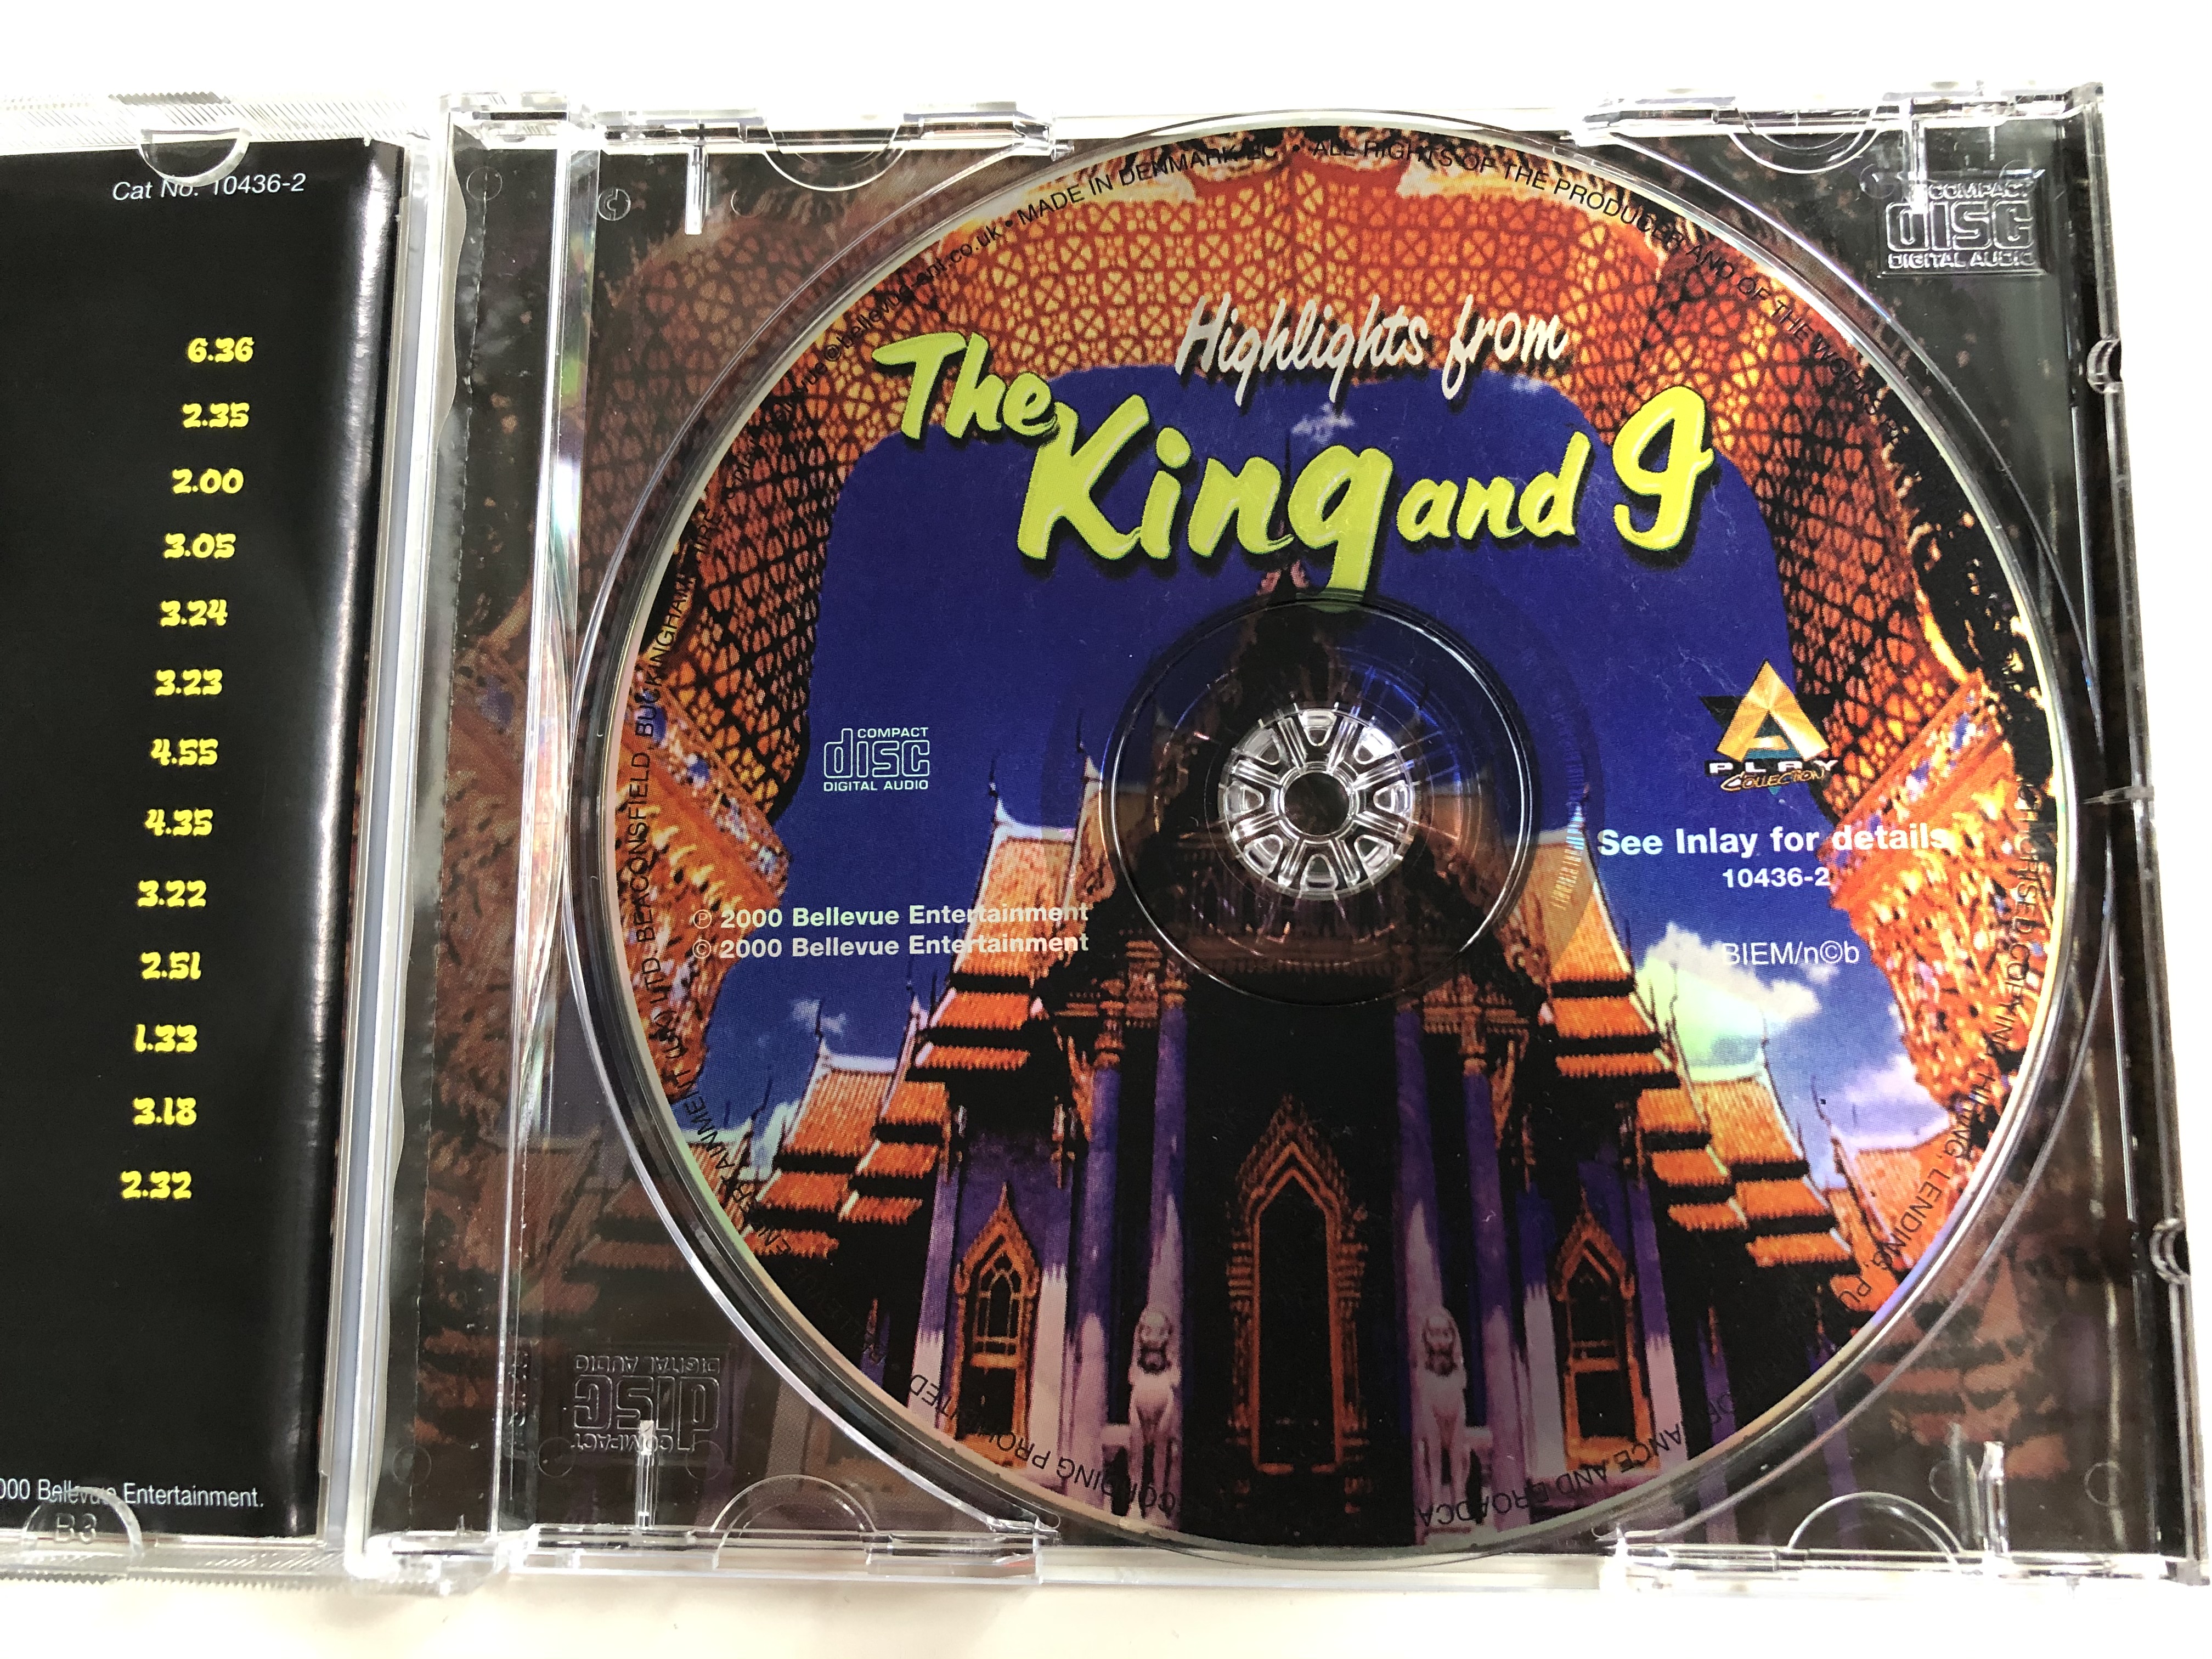 highlights-from-the-king-and-i-performed-by-the-west-end-players-and-singers-featuring-hello-young-lovers-getting-to-know-you-shall-we-dance-and-many-more...-bellevue-audio-cd-2000-104-3-.jpg